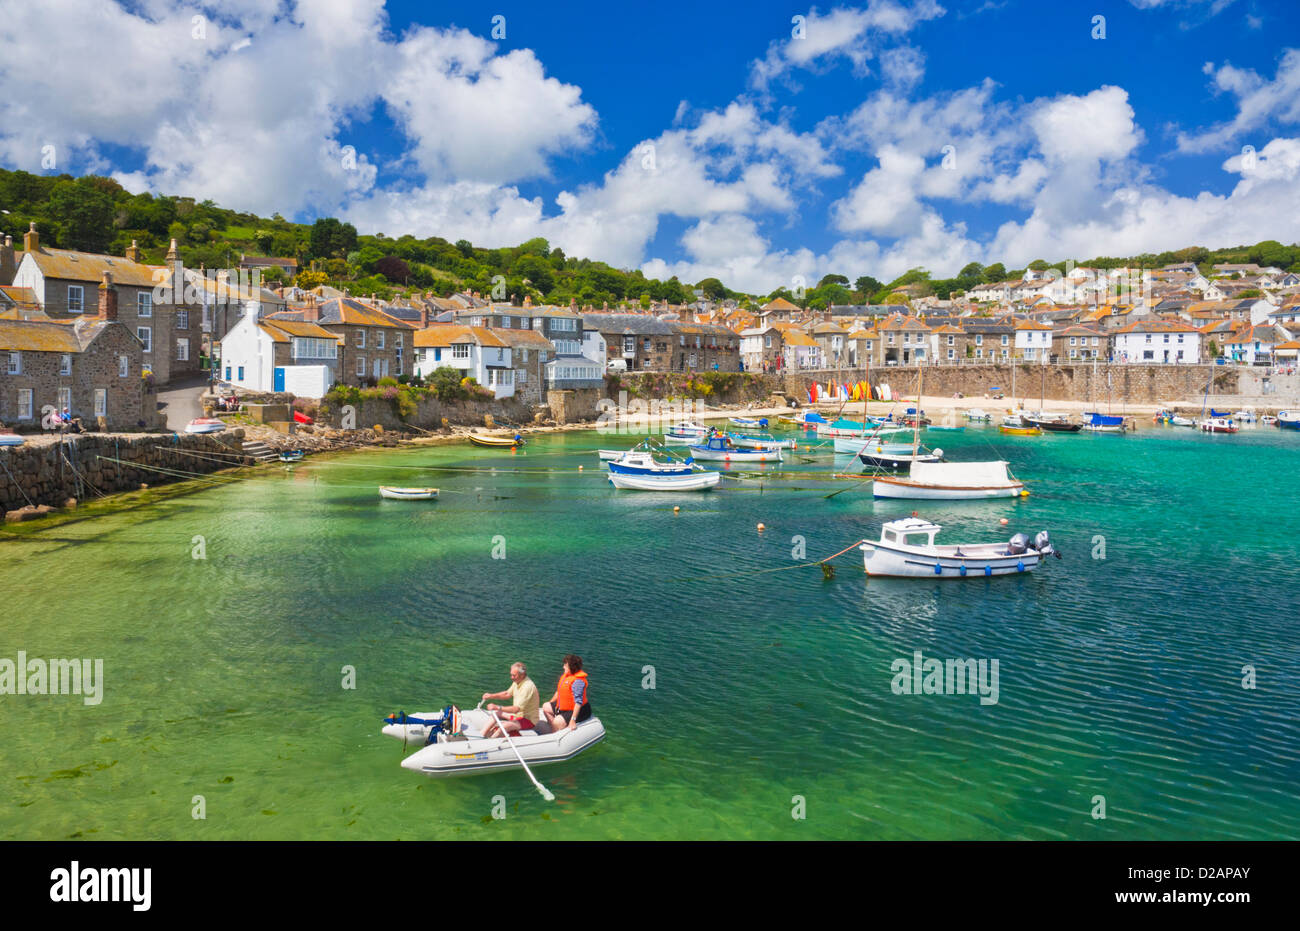 Family rowing in a small boat in amongst the Small fishing boats in Mousehole harbour Cornwall England GB UK EU Europe Stock Photo